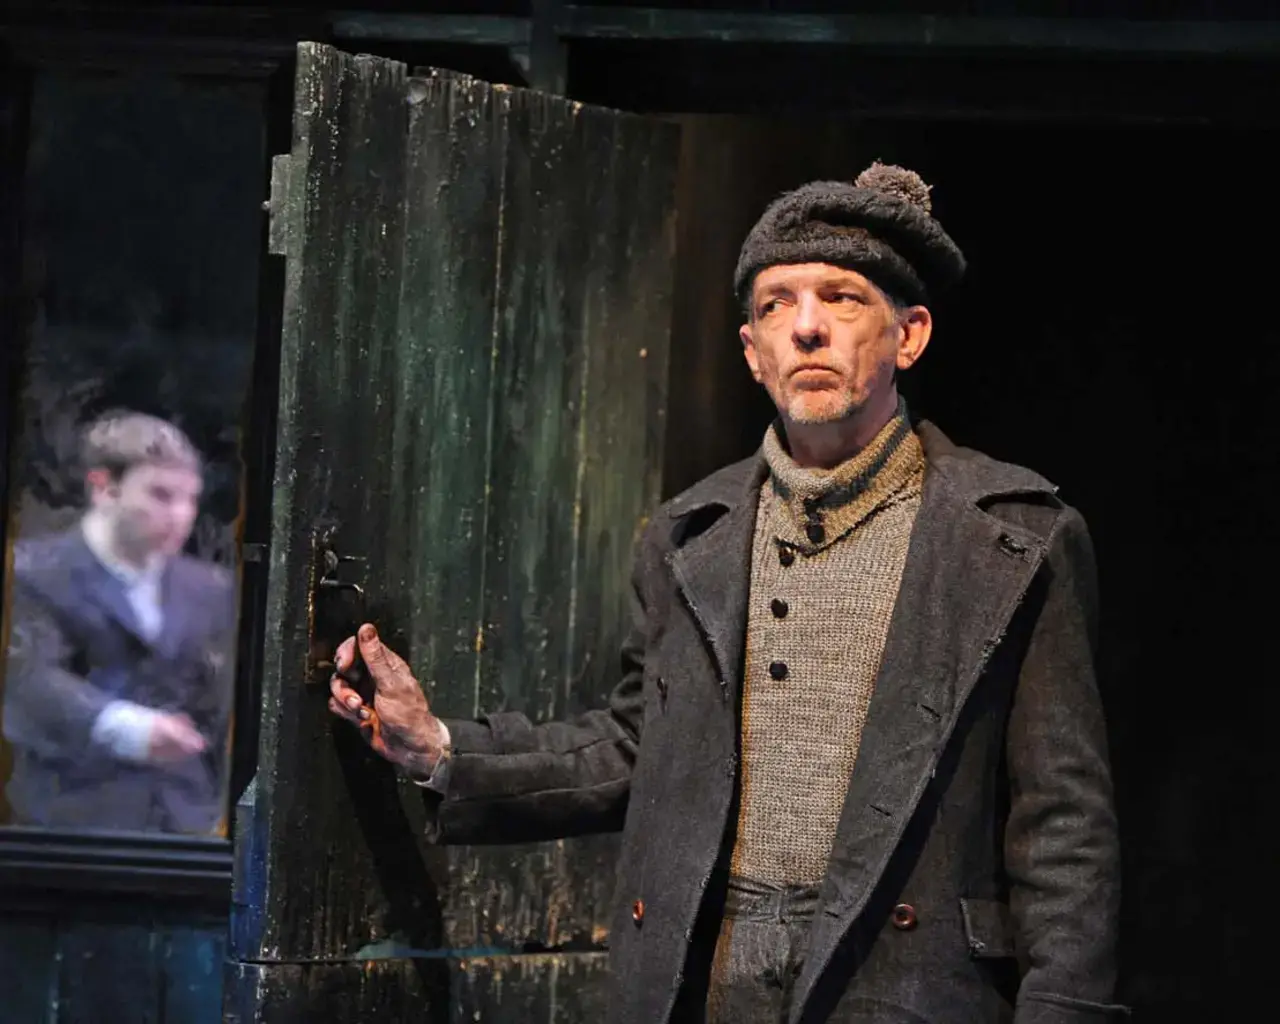 Tadhg Murphy and Liam Carney in The Cripple of Inishmaan. Photo by Robert Day.